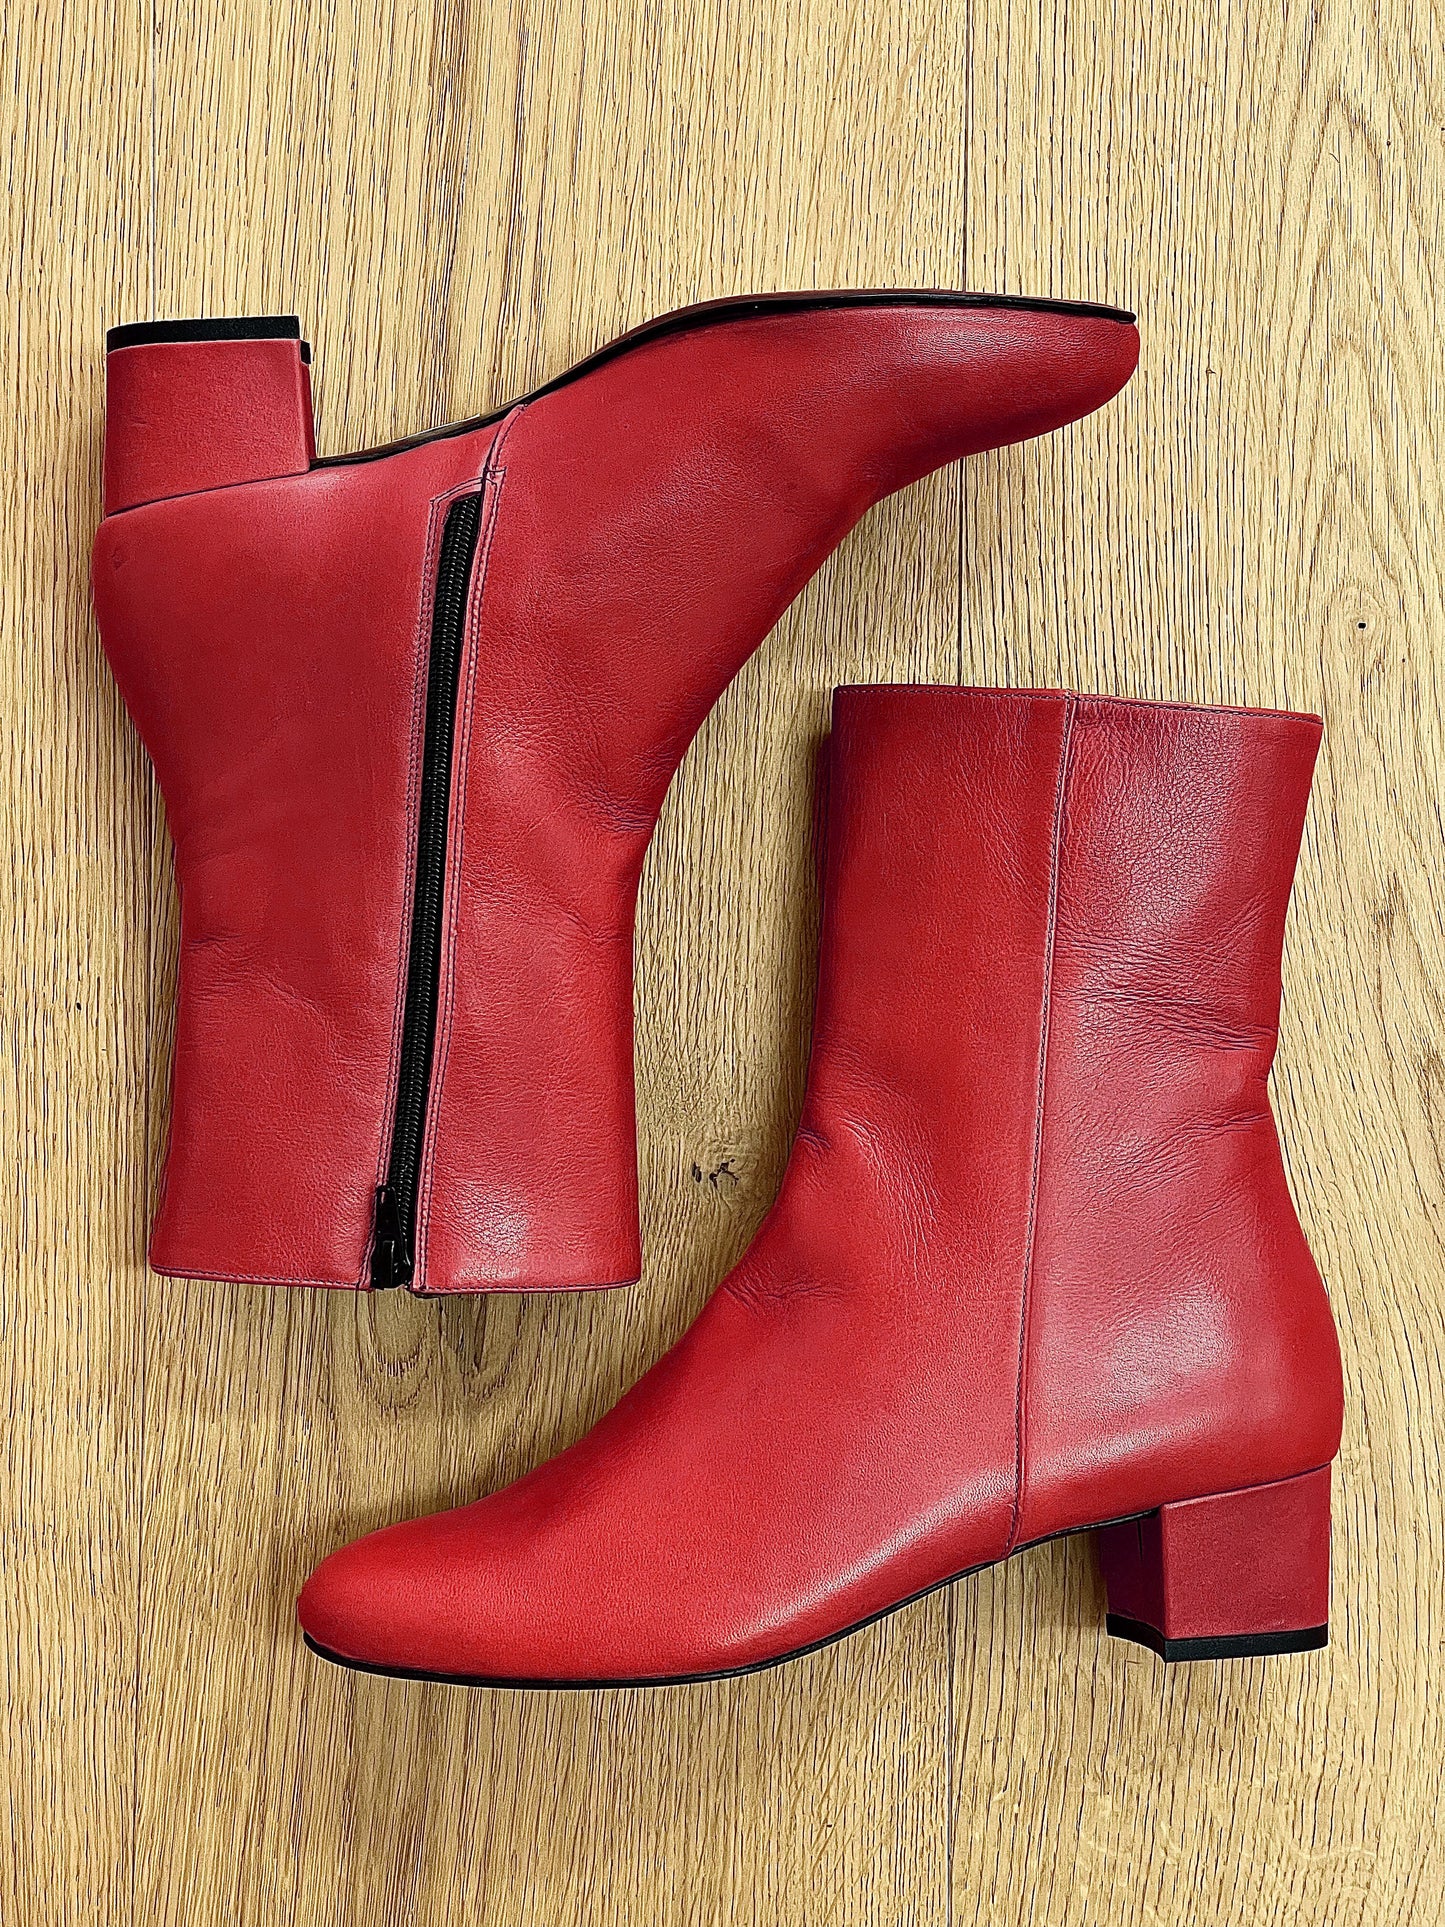 MAXIM LEATHER RED